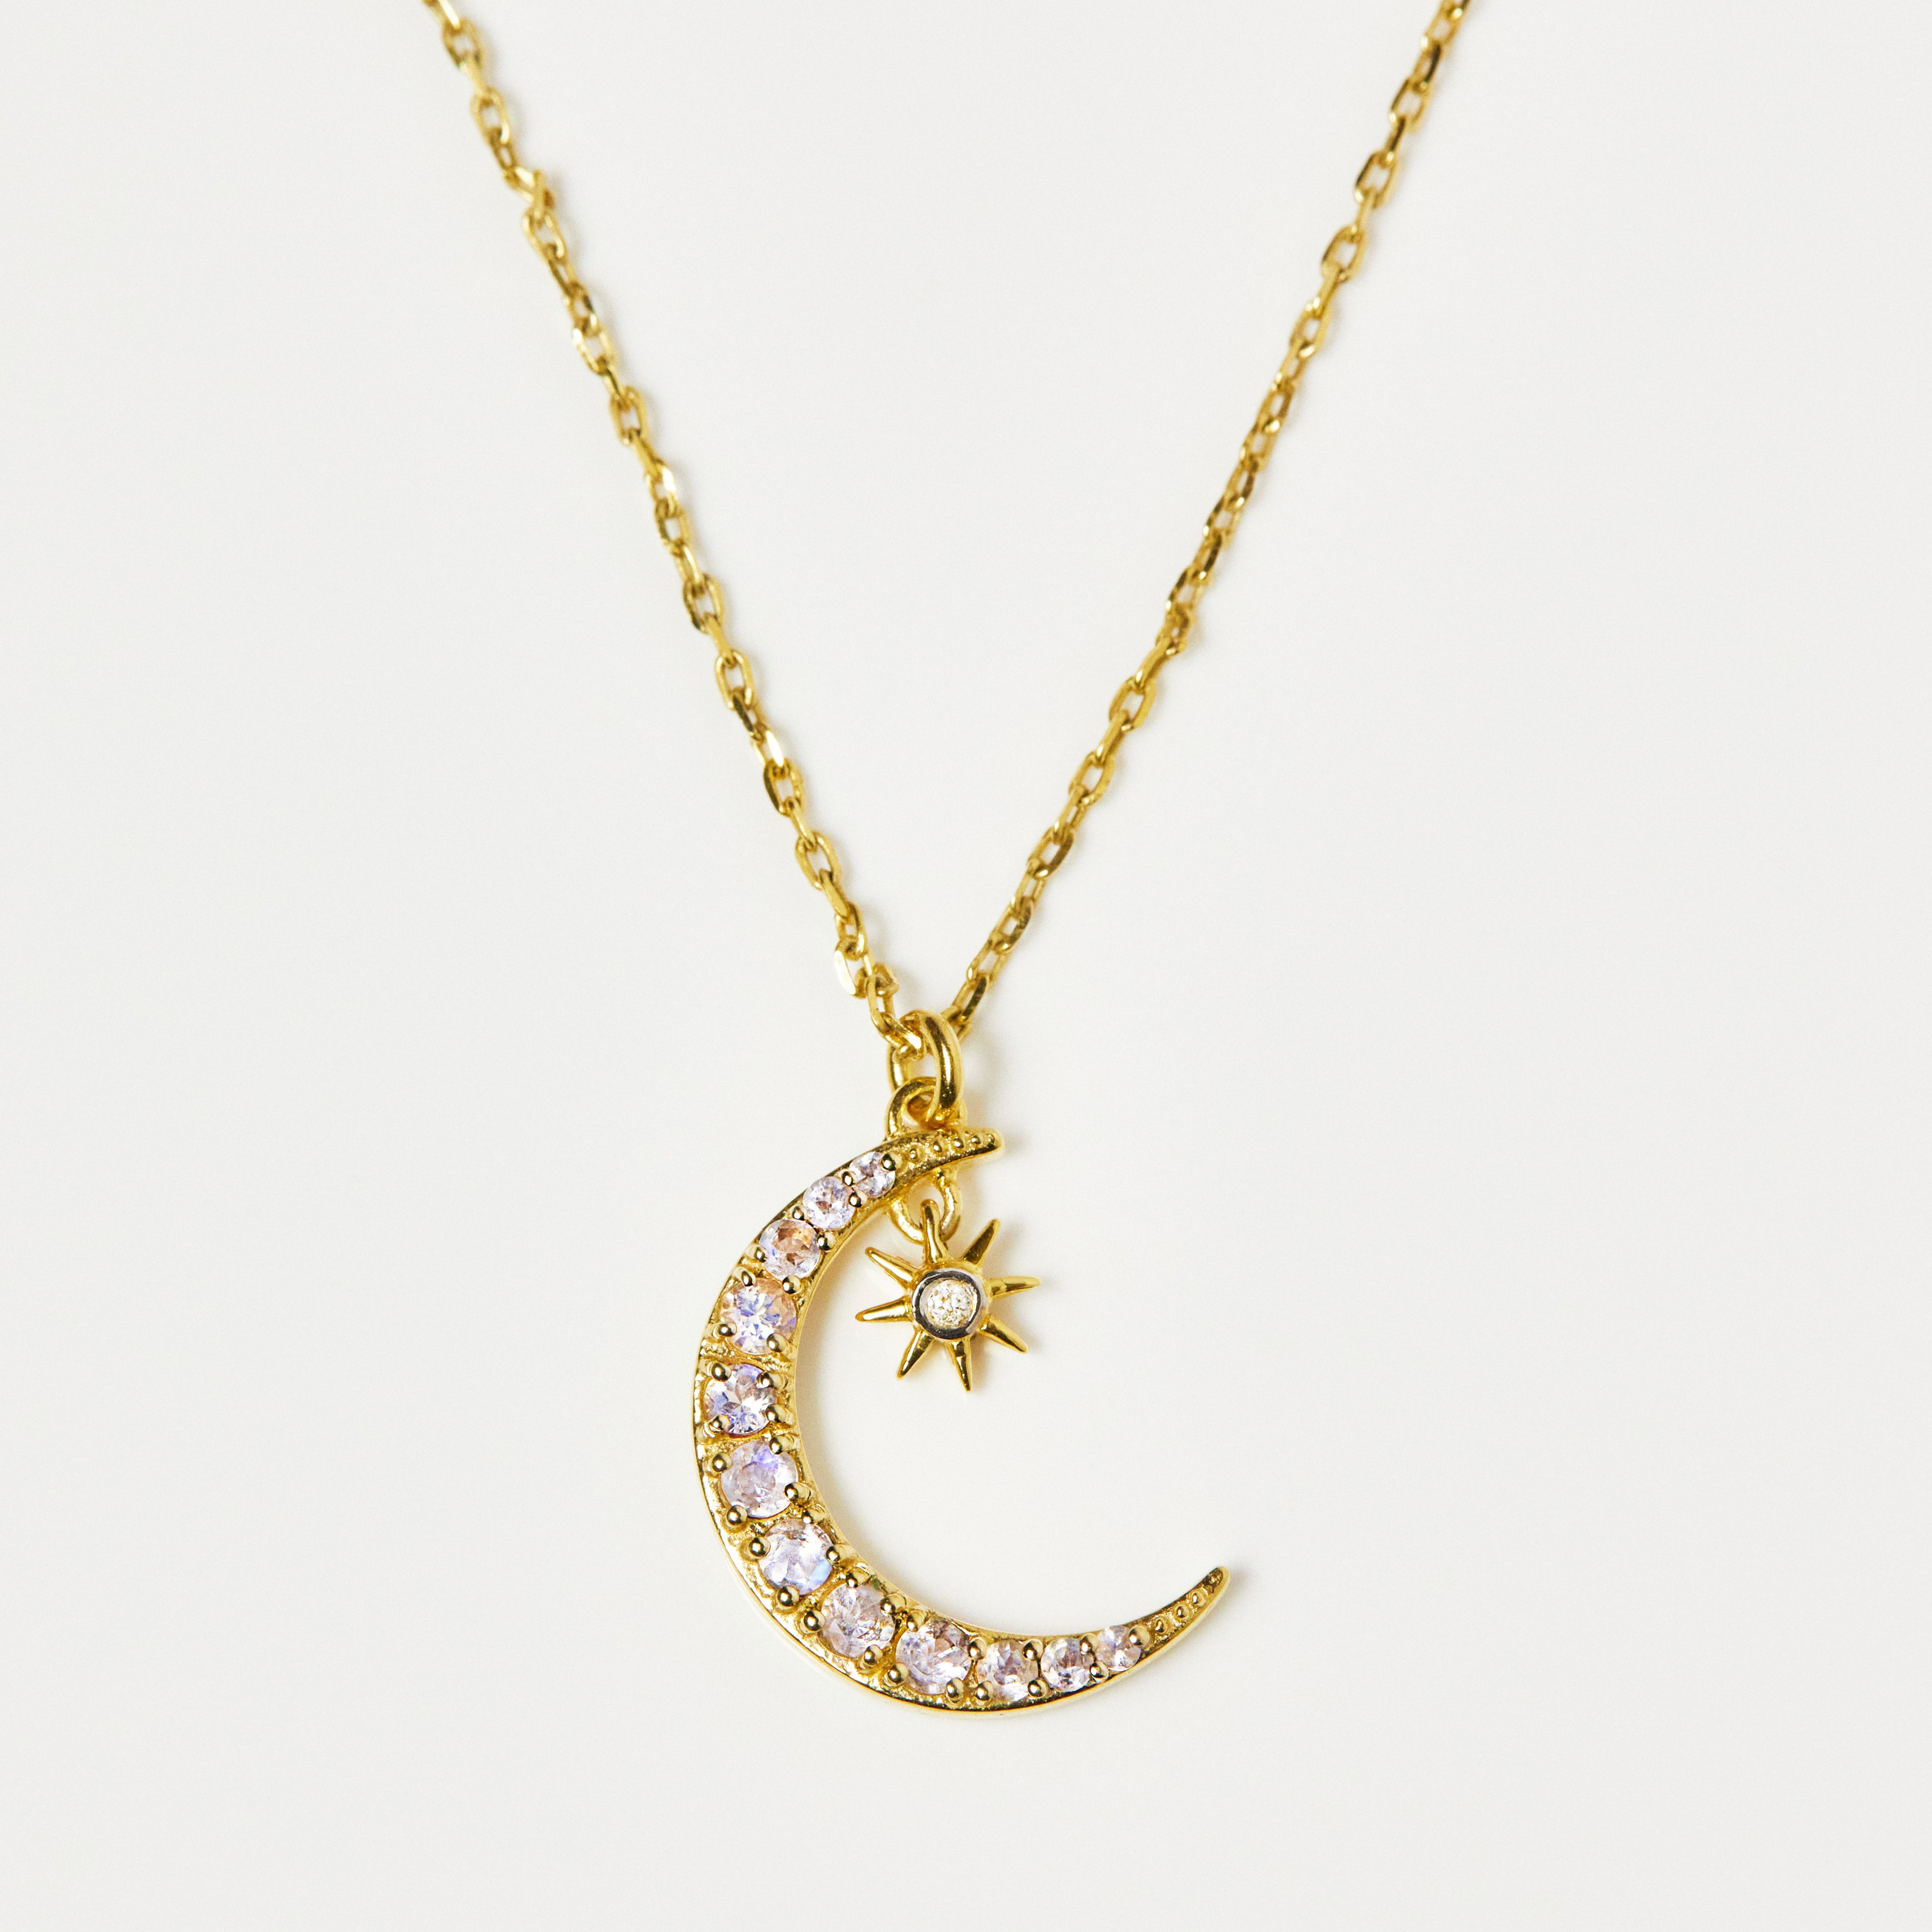 Amazon.com: 14k Solid Gold Crescent Moon Necklace, Choker Moon Necklace,  Elegant Moon Pendant, Solitaire Diamond Moon Necklace, Great Gift for Women  Girls, Gift for Birthday Graduation Wedding Bridesmaid Gifts. : Handmade  Products